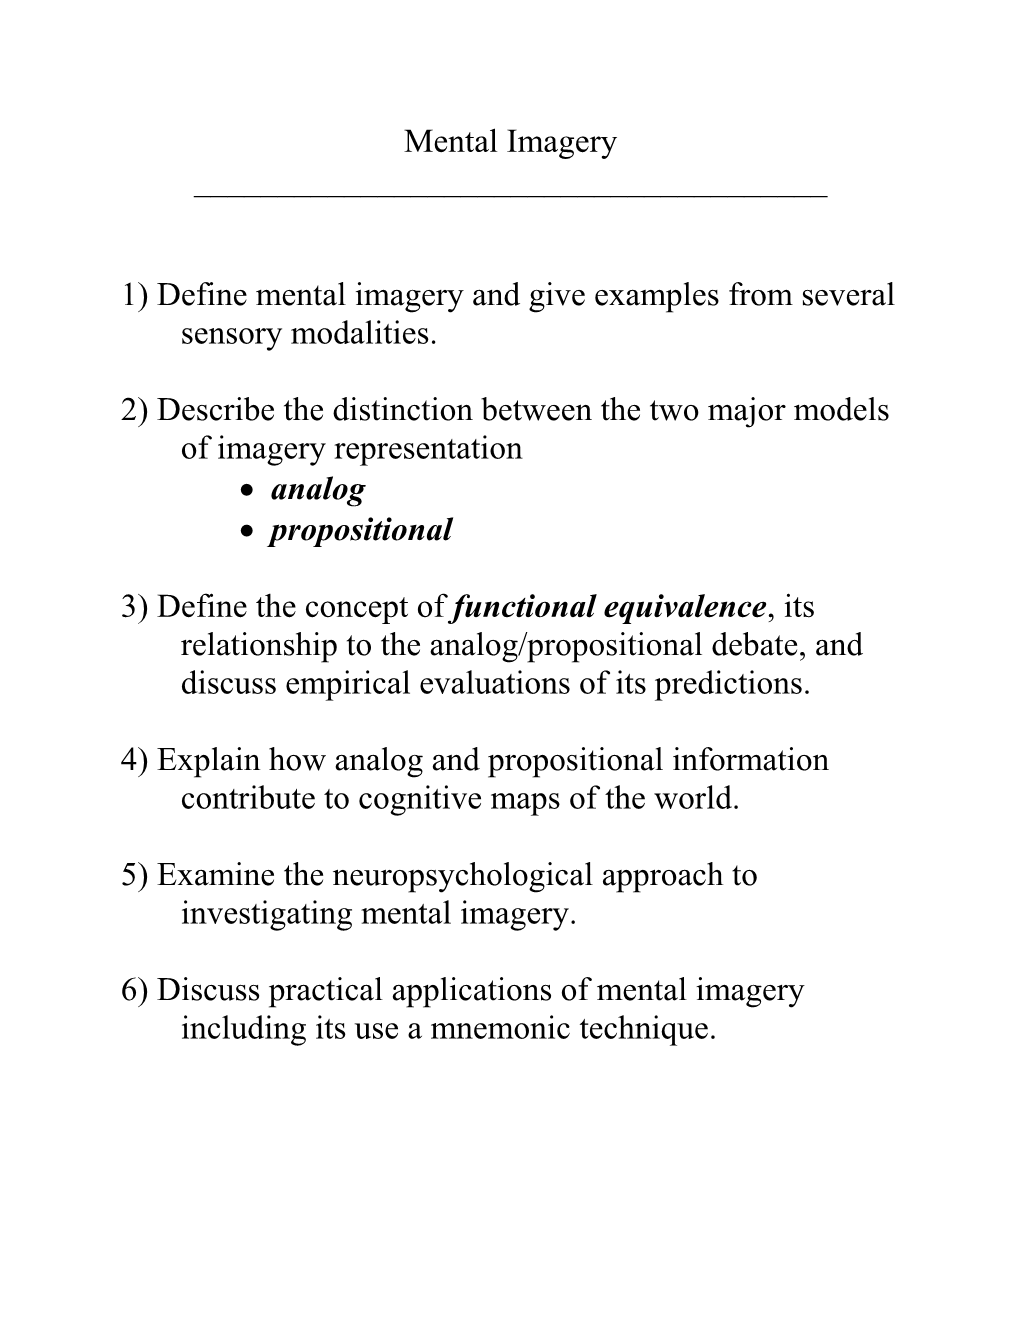 1) Define Mental Imagery and Give Examples from Several Sensory Modalities